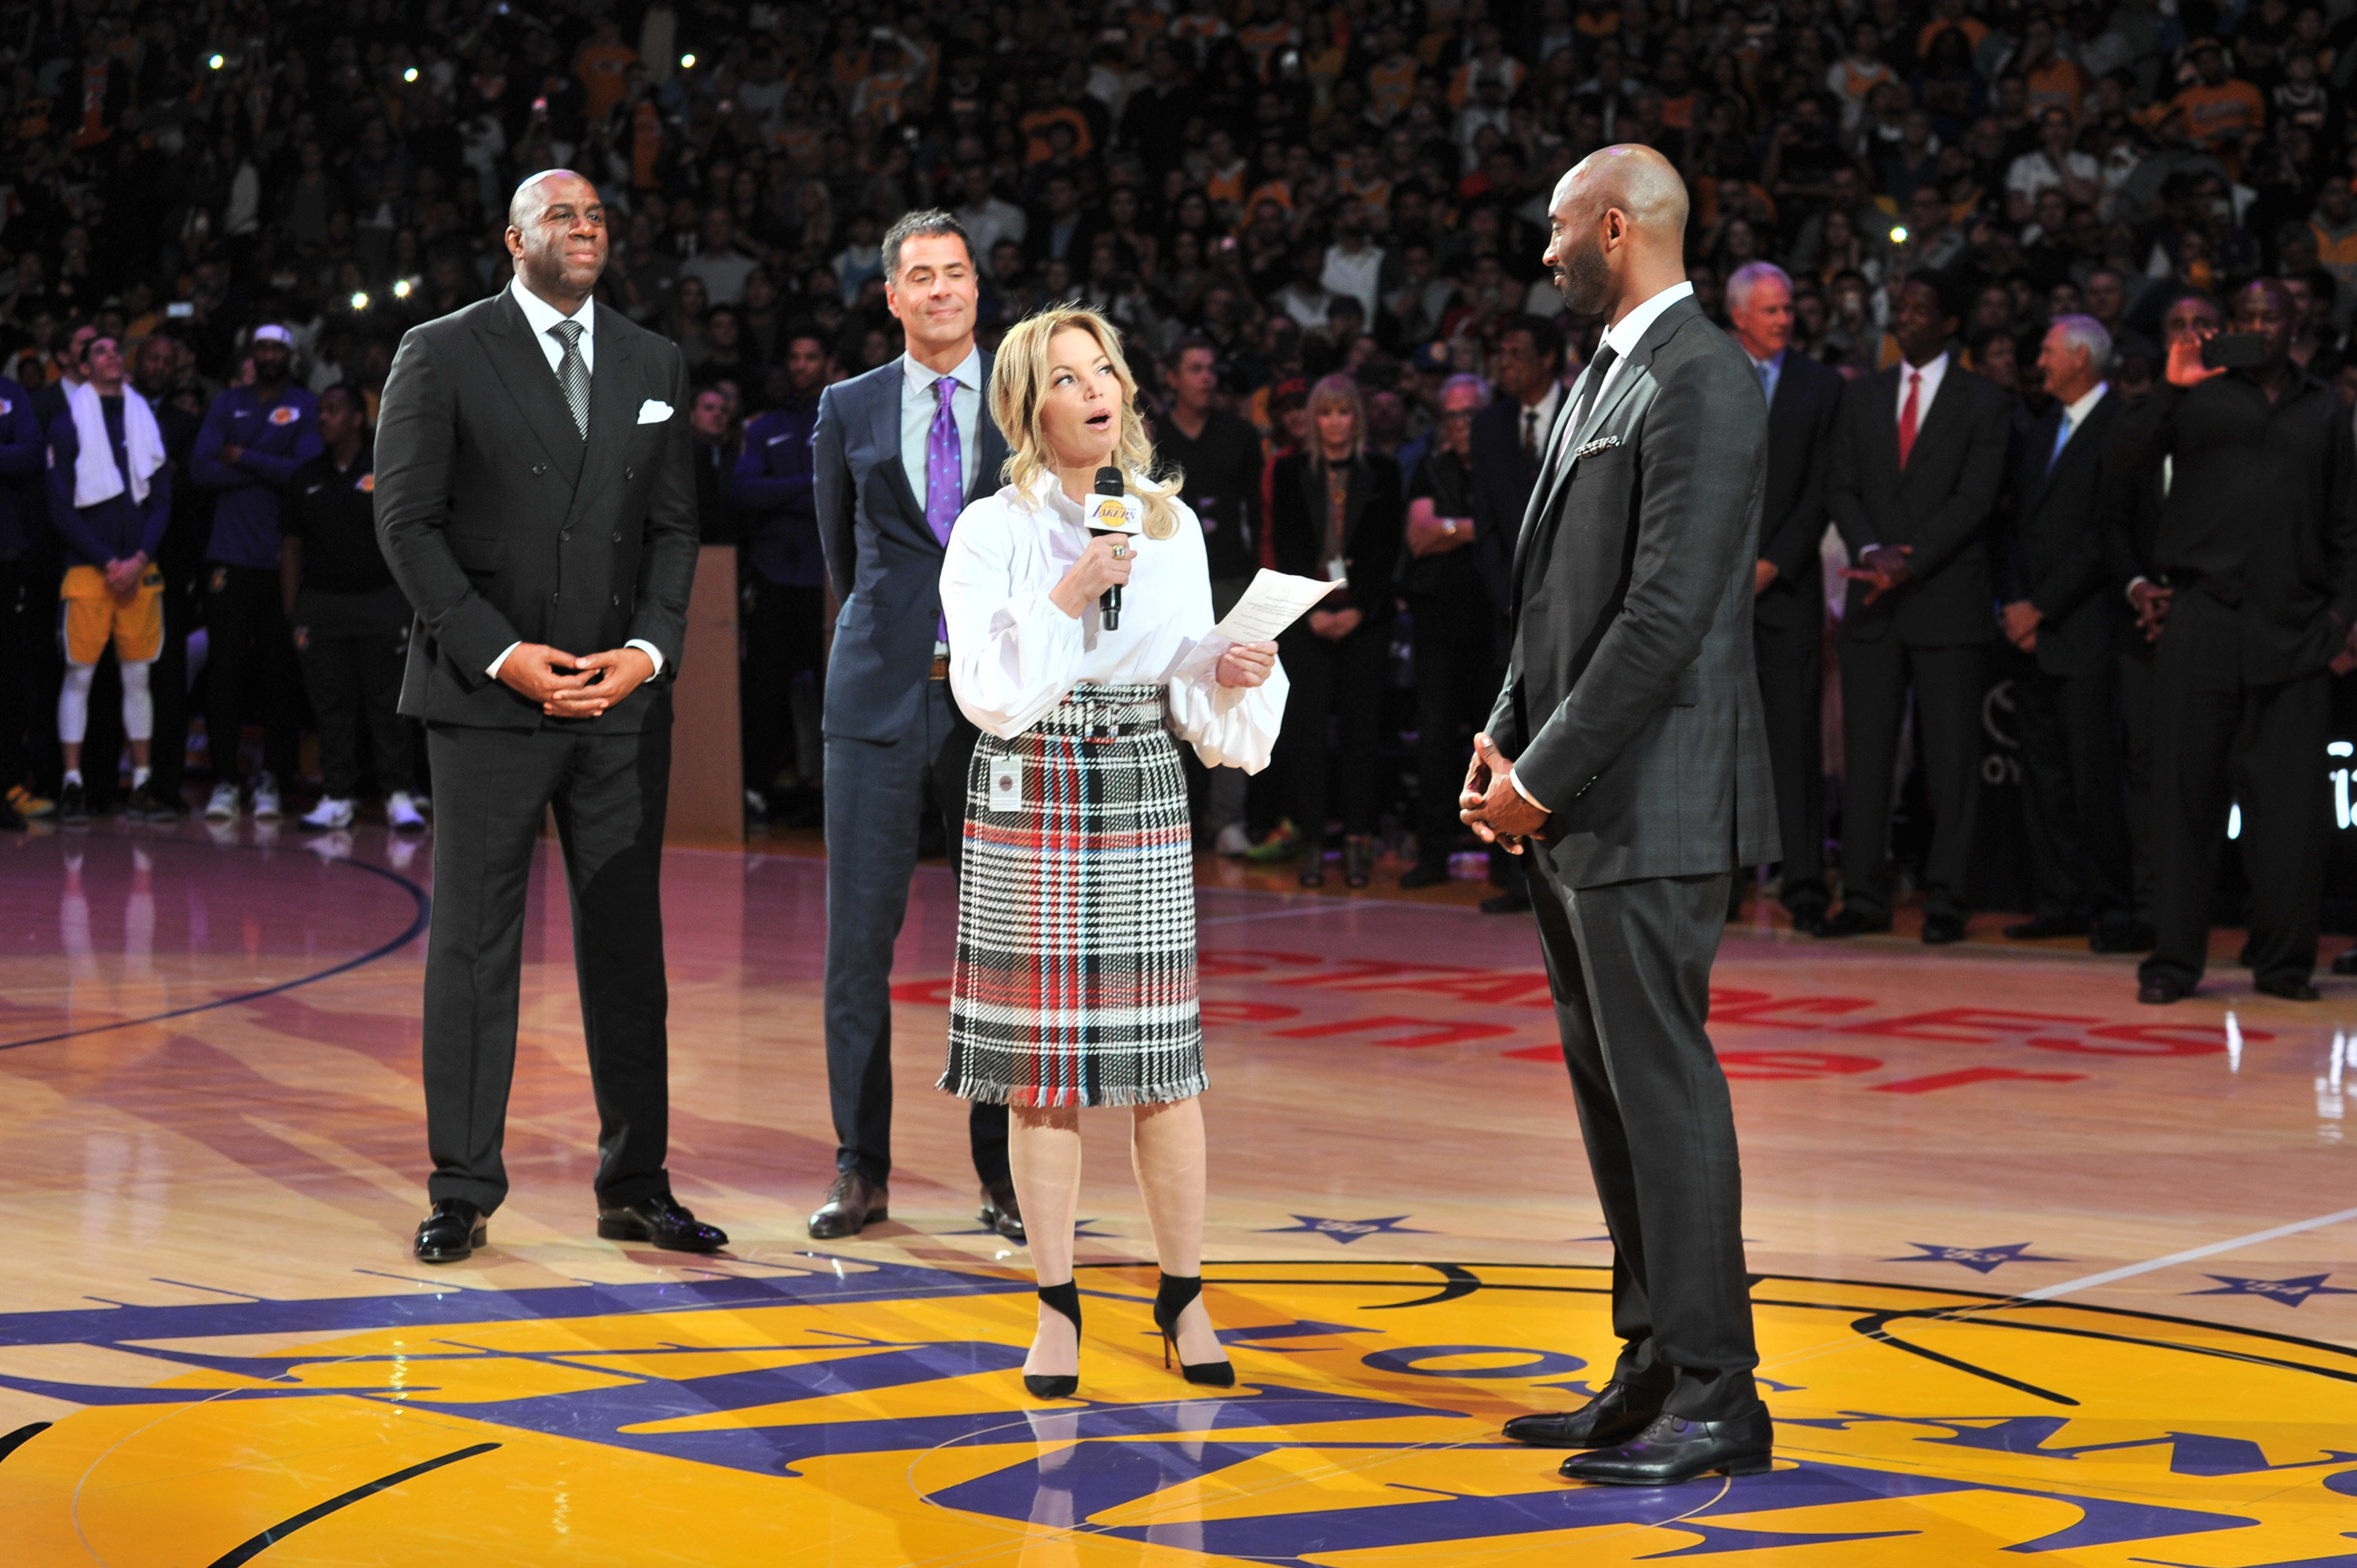 Los Angeles Lakers to retire Kobe Bryant's jersey on Dec. 18